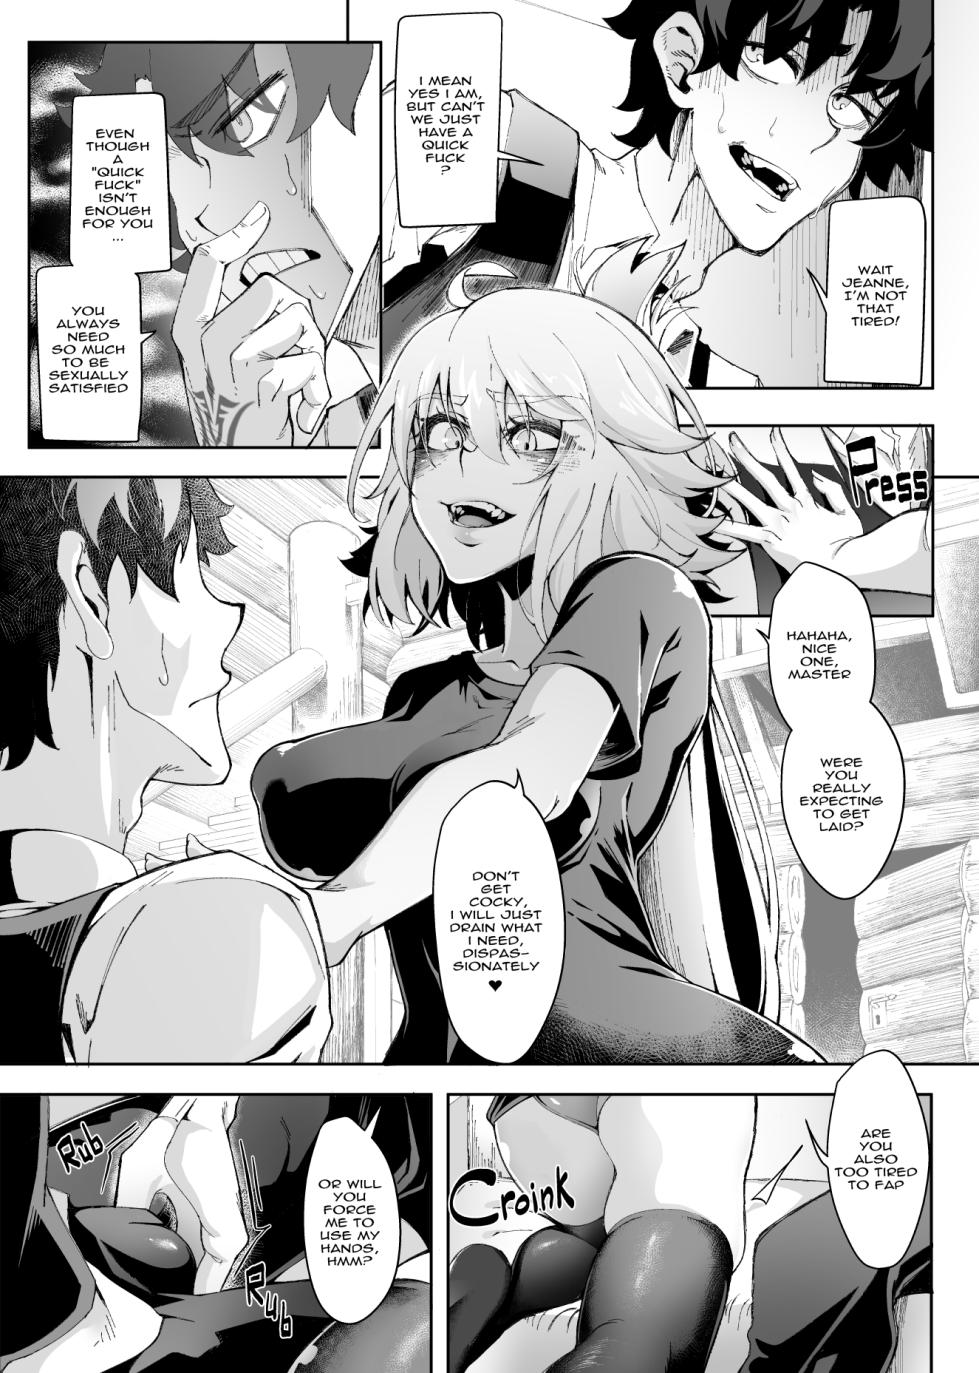 [Kid] The Baddest (Fate/Grand Order) - Page 19